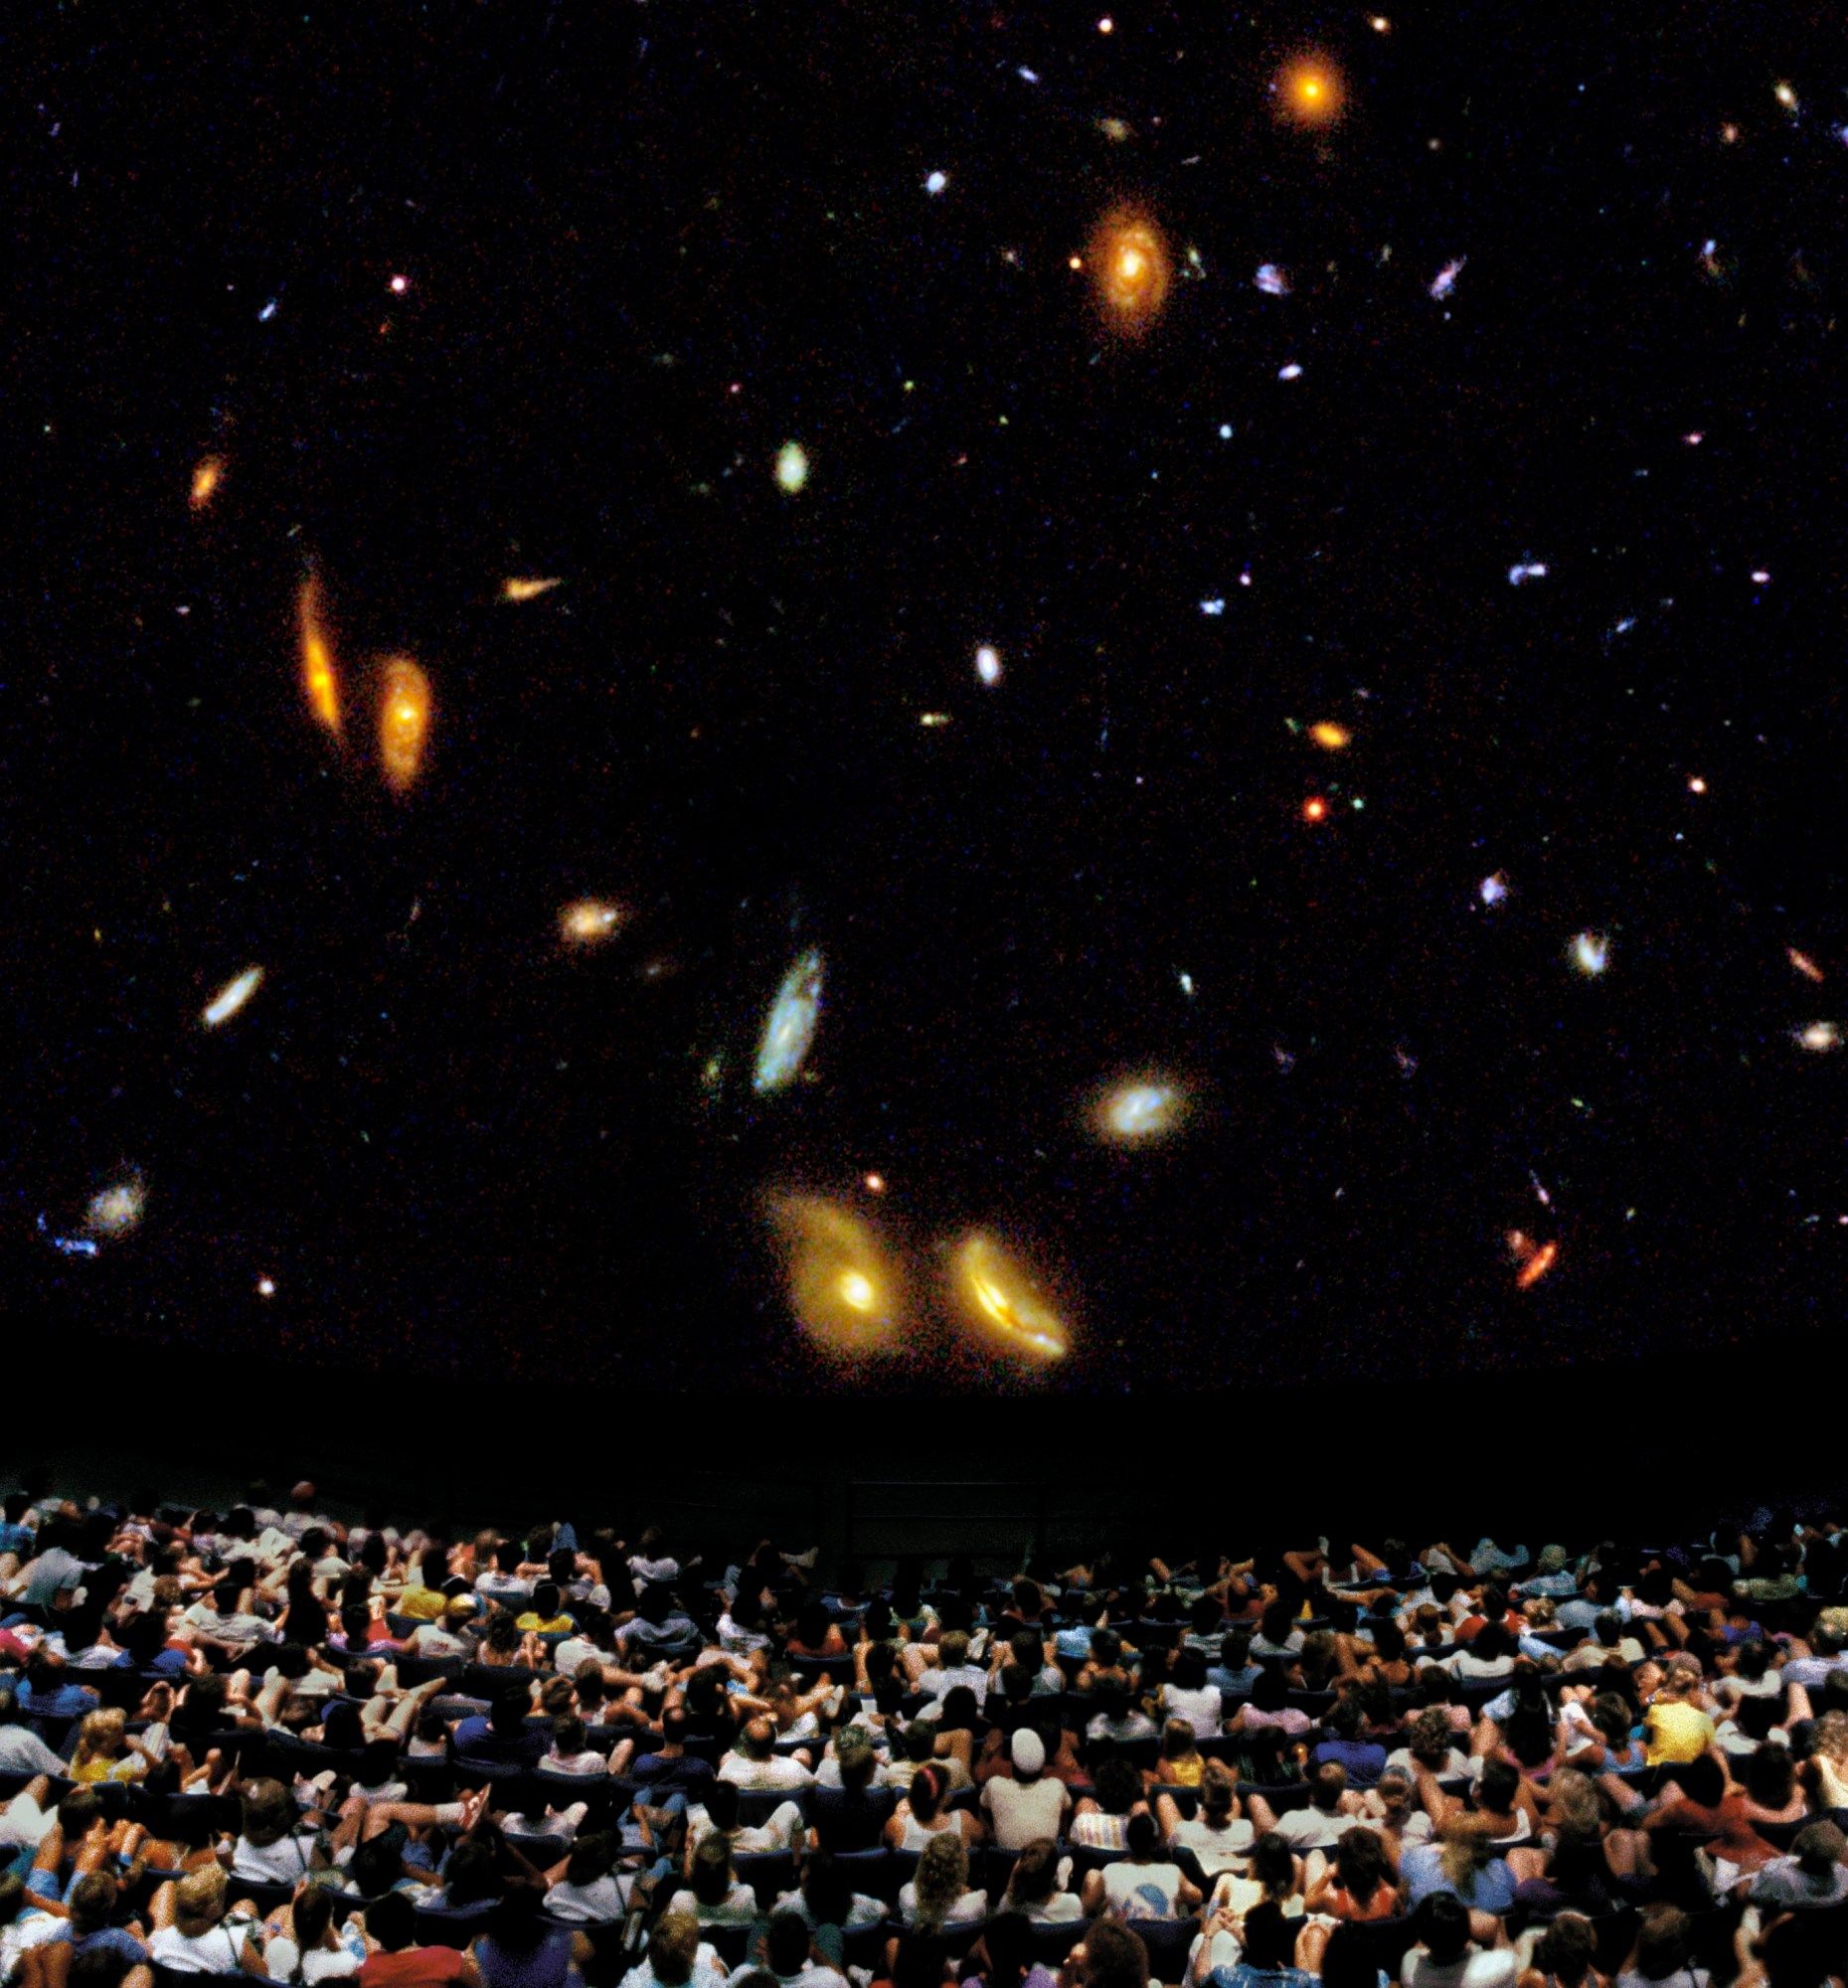 An audience in a theater watches a large format film showing galaxies.